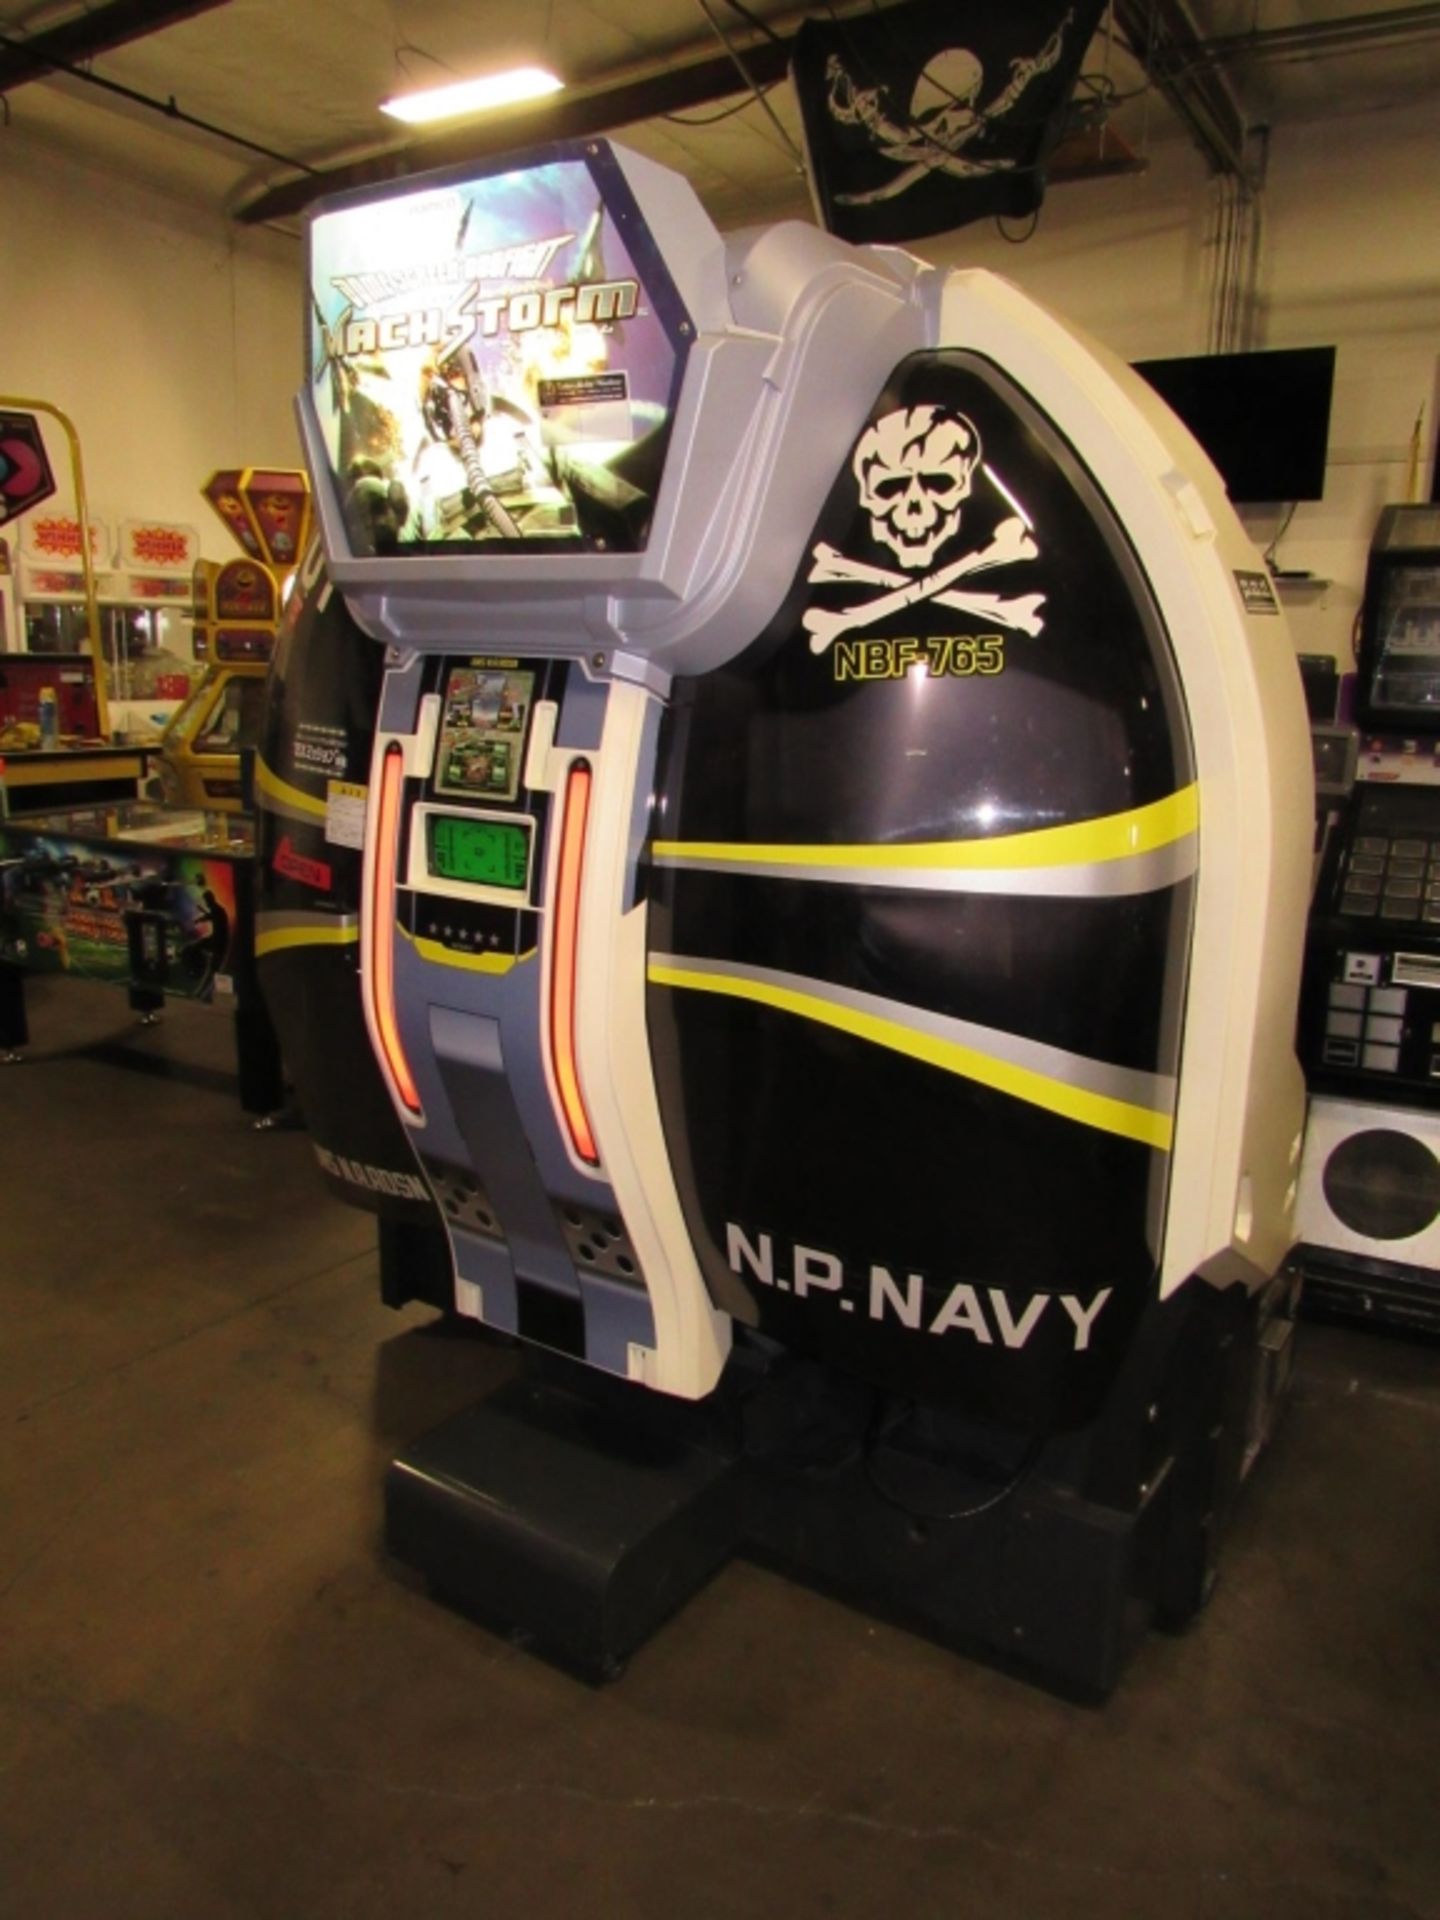 MACH STORM DX DOME JET FIGHTER ARCADE NAMCO - Image 9 of 9